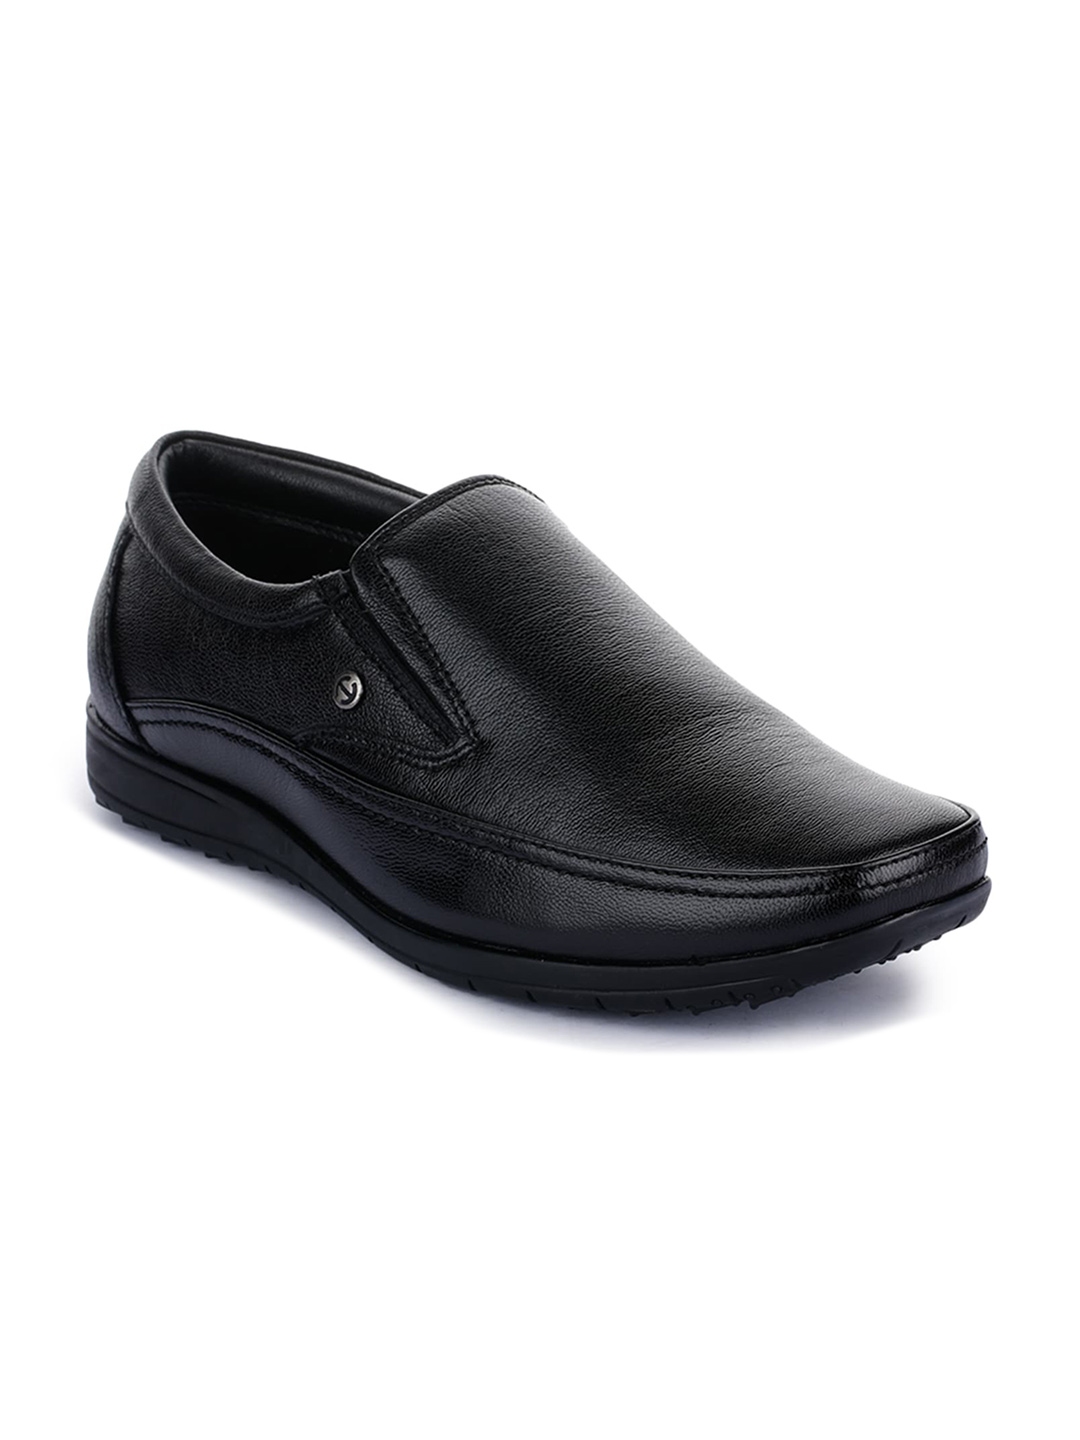 Buy Liberty Men Textured Leather Formal Slip On Shoes Formal Shoes For Men 23056148 Myntra 6691